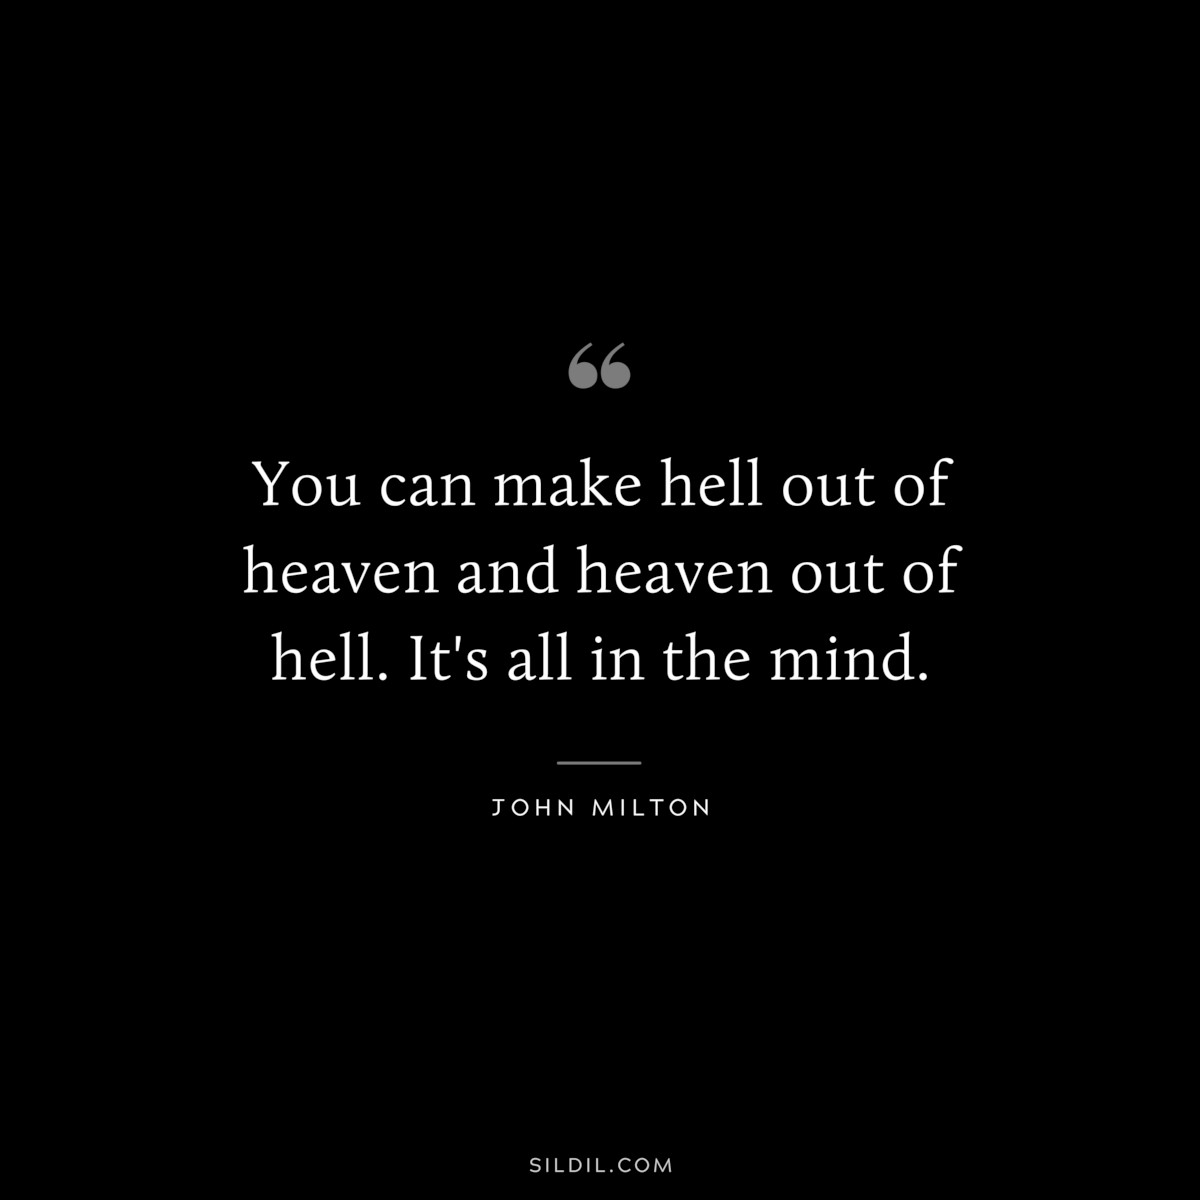 You can make hell out of heaven and heaven out of hell. It's all in the mind. ― John Milton